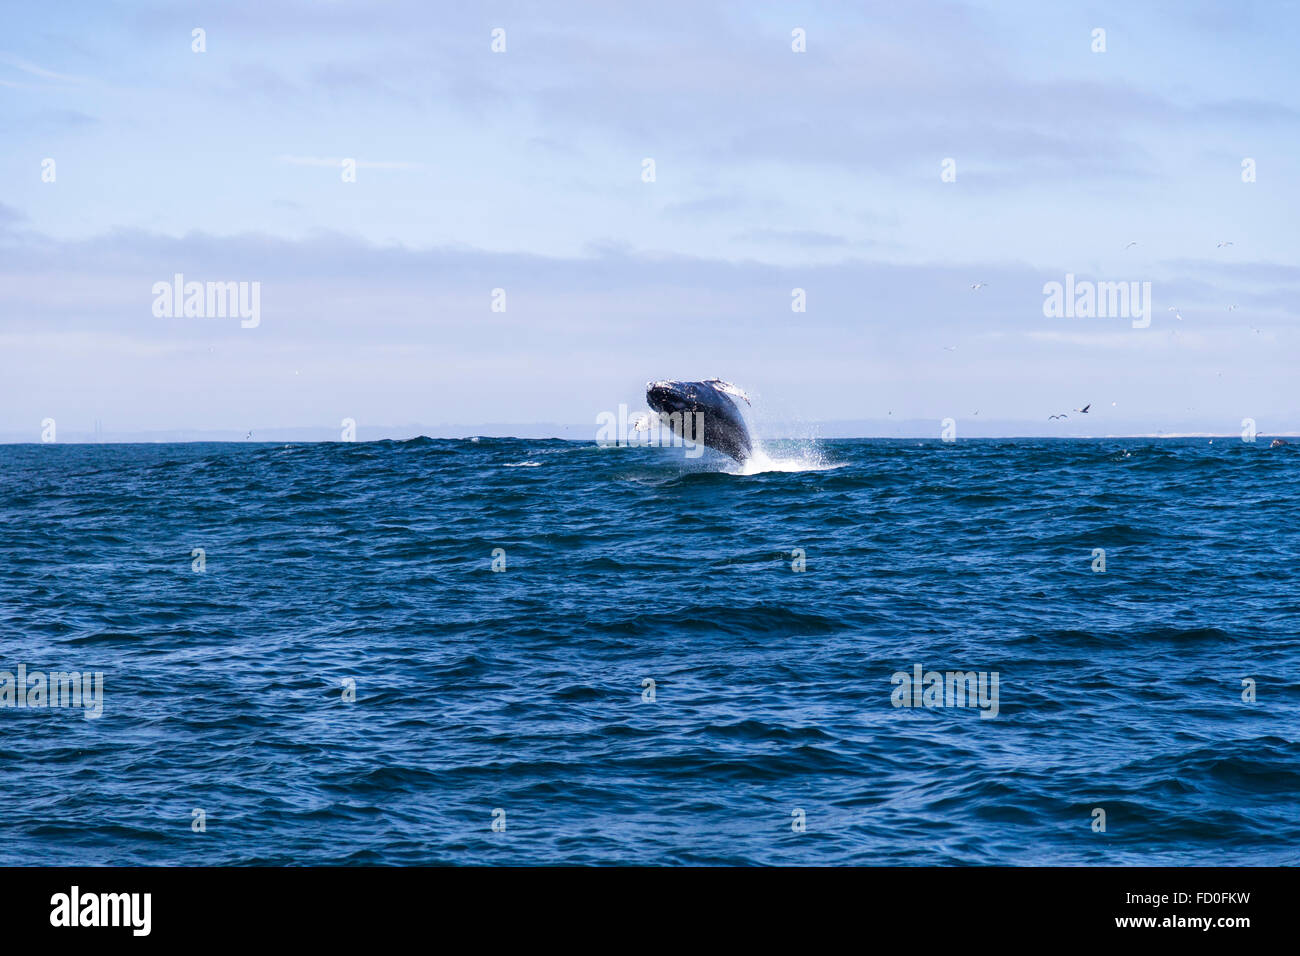 Humpback whale (Megaptera novaeangliae)jumping out of water in Monterey bay, California Stock Photo